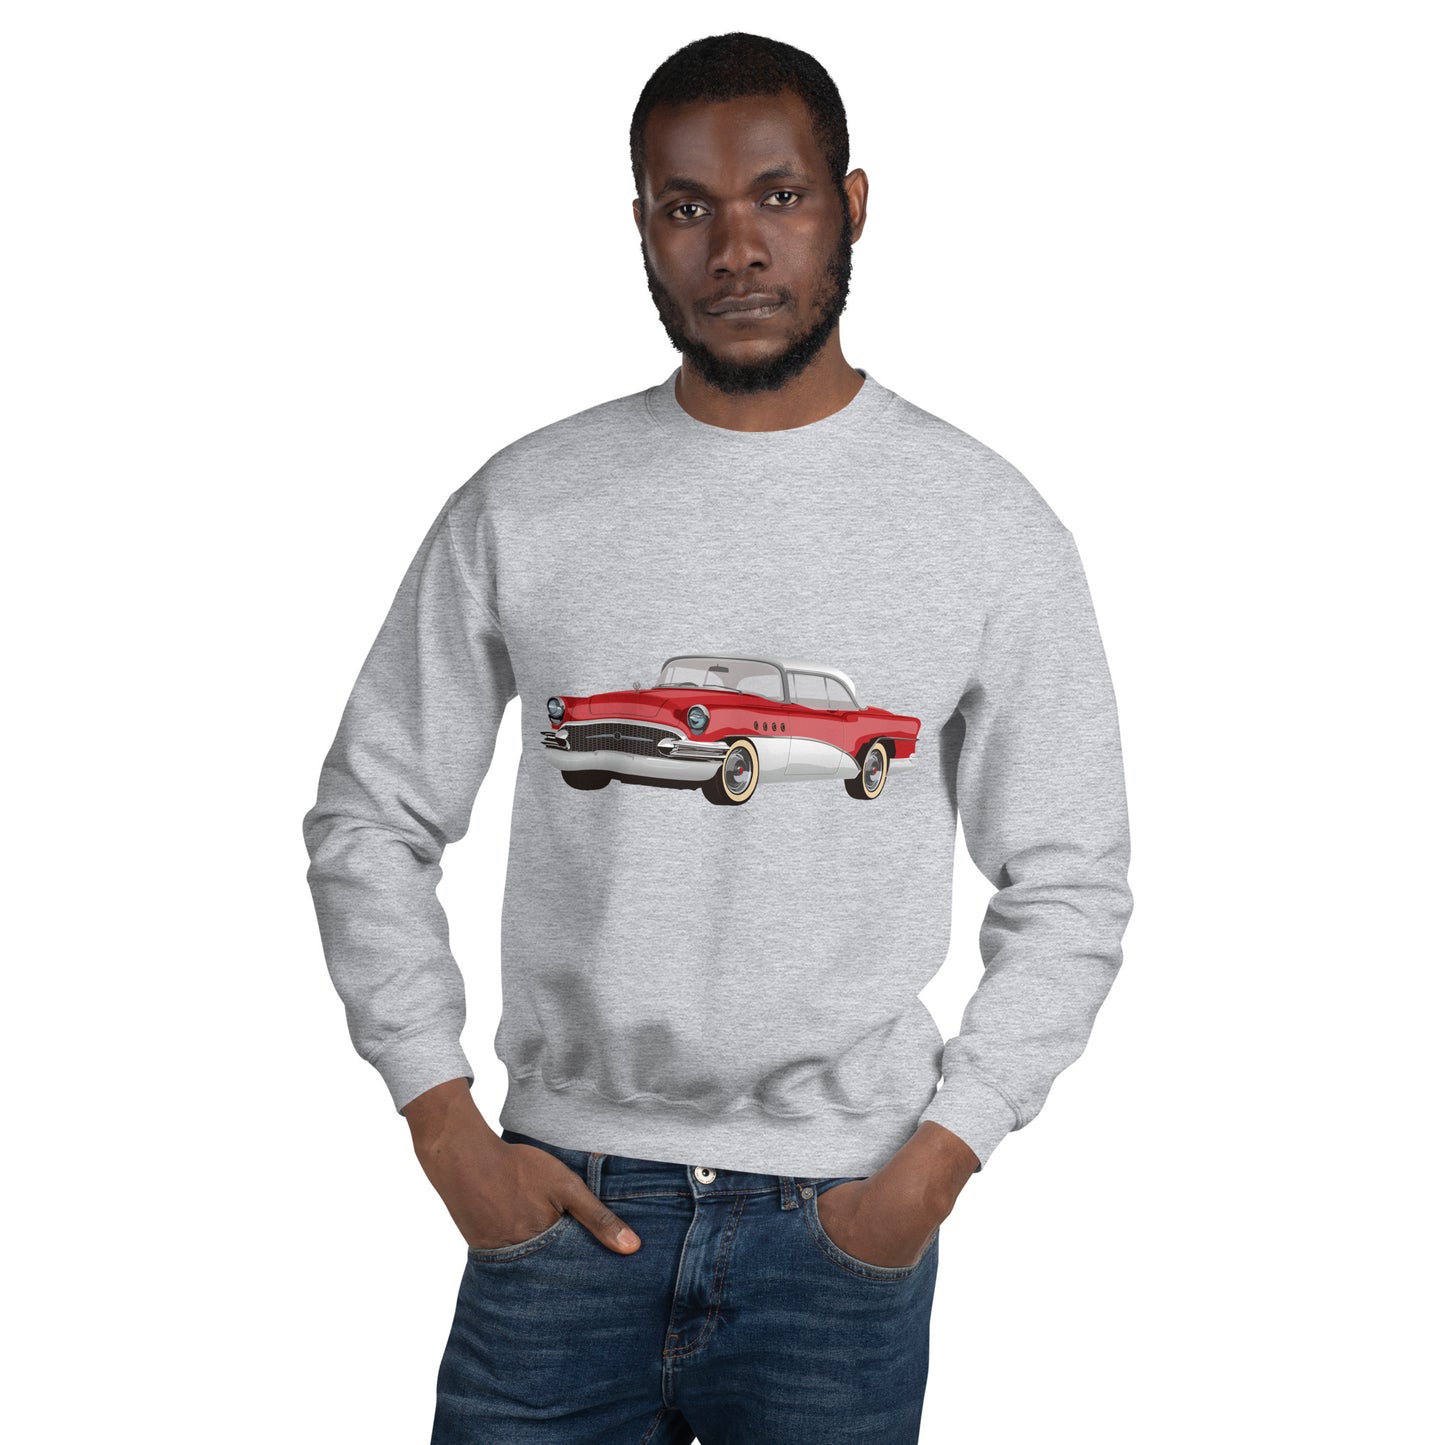 Man with sport grey sweatshirt with red chevrolet